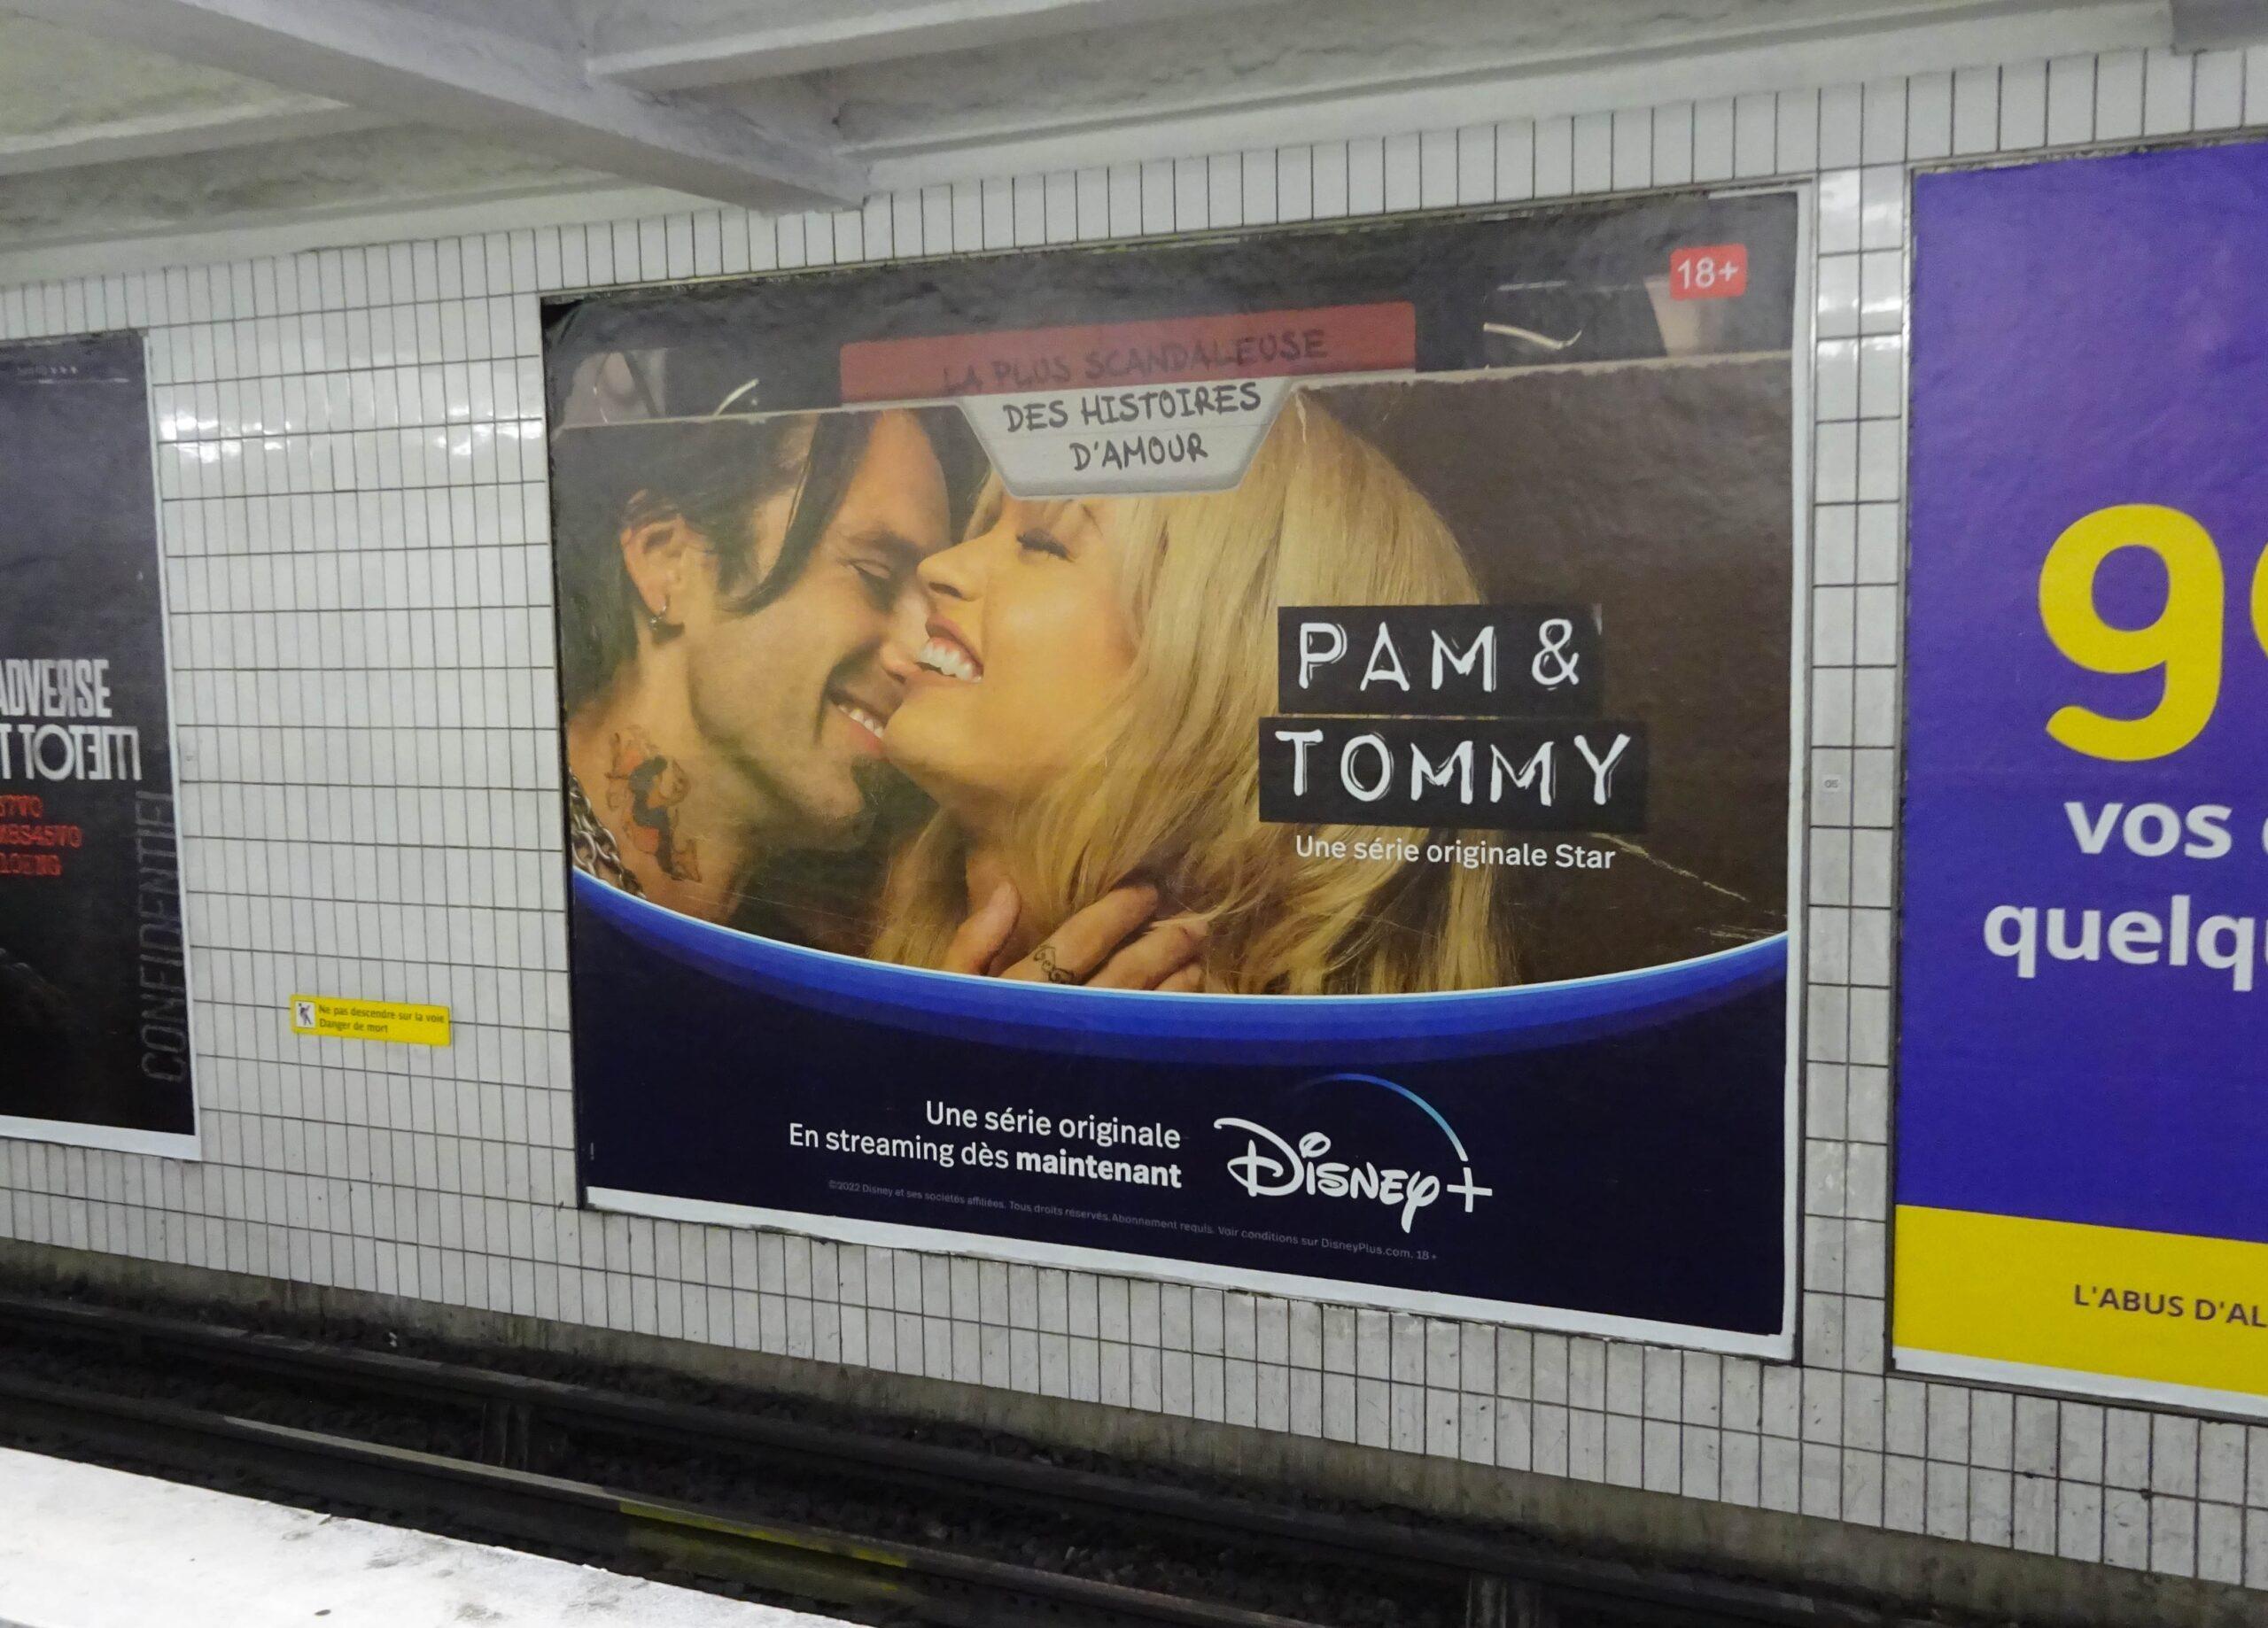 Lily James and Sebastian Stan in the Pam amp Tommy advert poster in the Metro in Paris